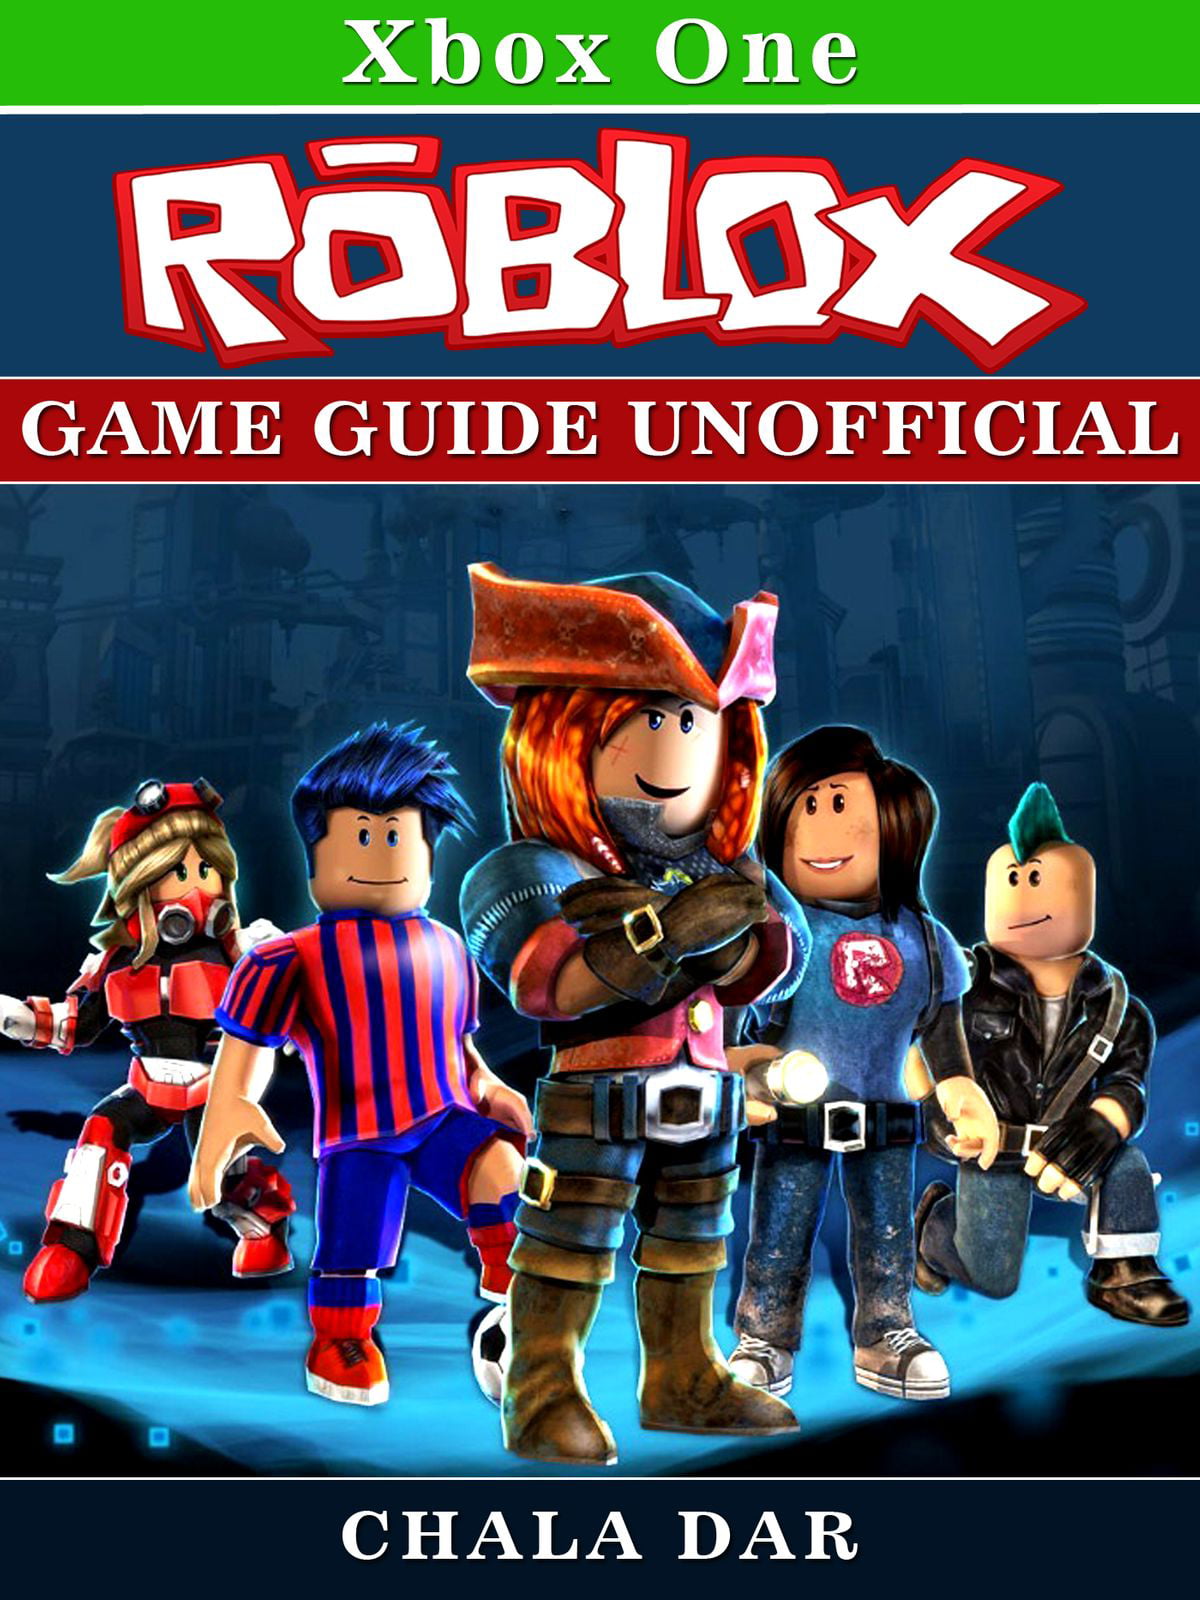 Roblox Xbox One Game Guide Unofficial Ebook Walmart Com - roblox dvd xbox one